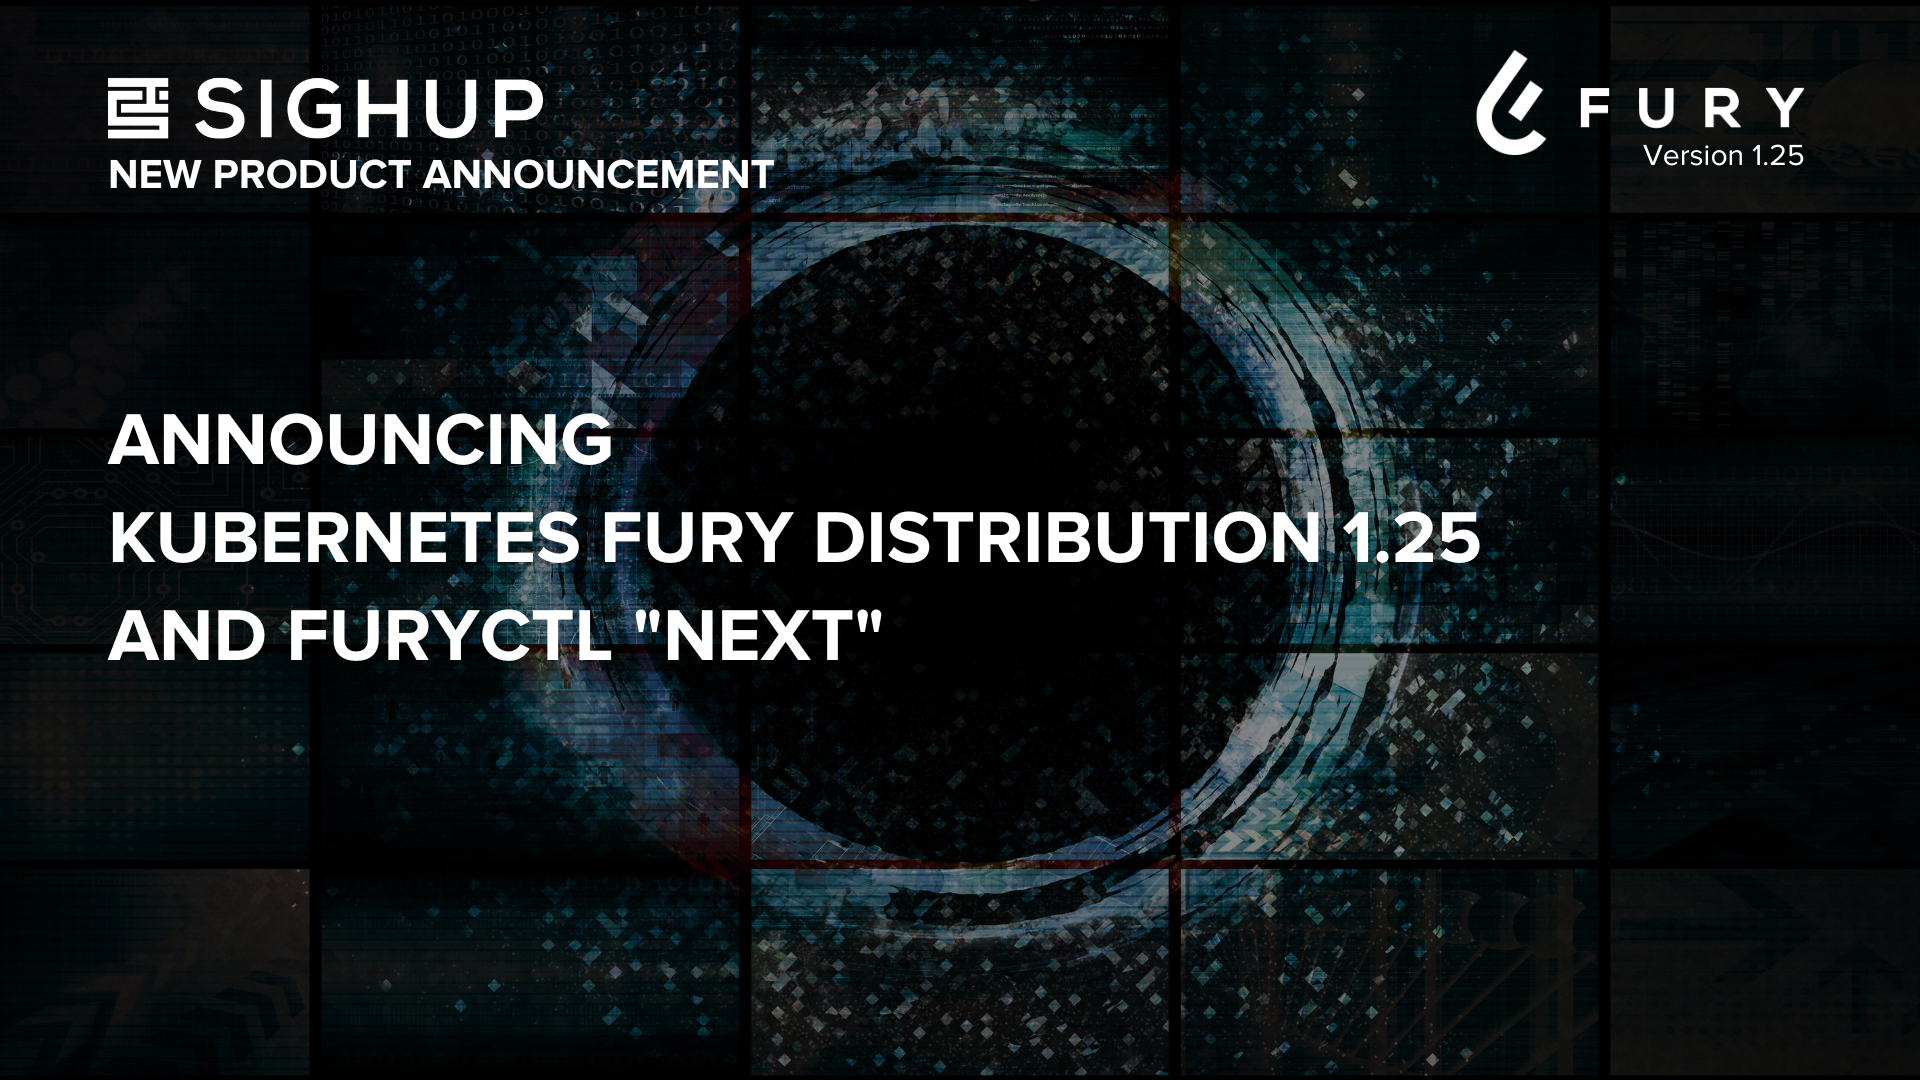 Announcing Kubernetes Fury Distribution 1.25 (KFD) Latest Release and Furyctl "NEXT"